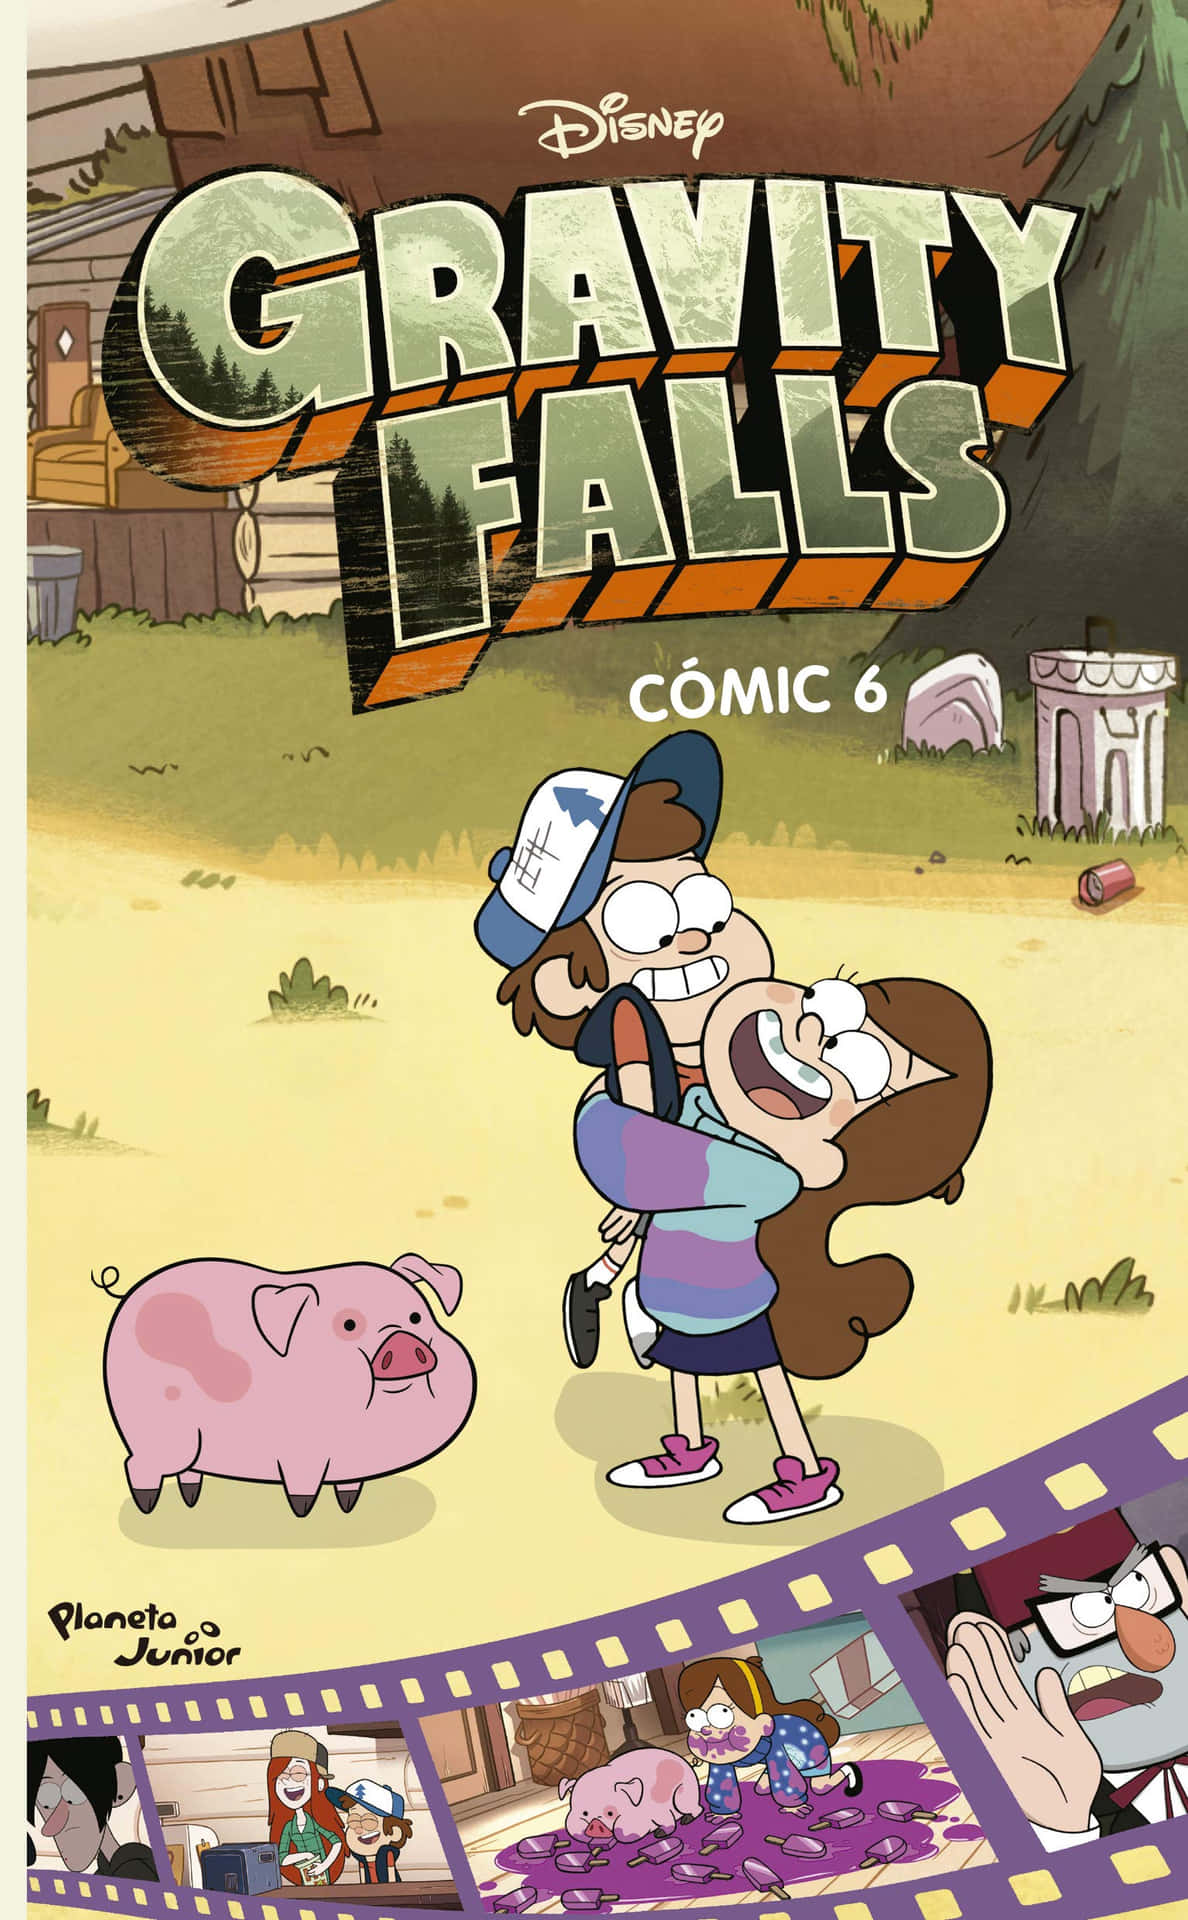 Dipper and Mabel explore the strange and mysterious world of Gravity Falls